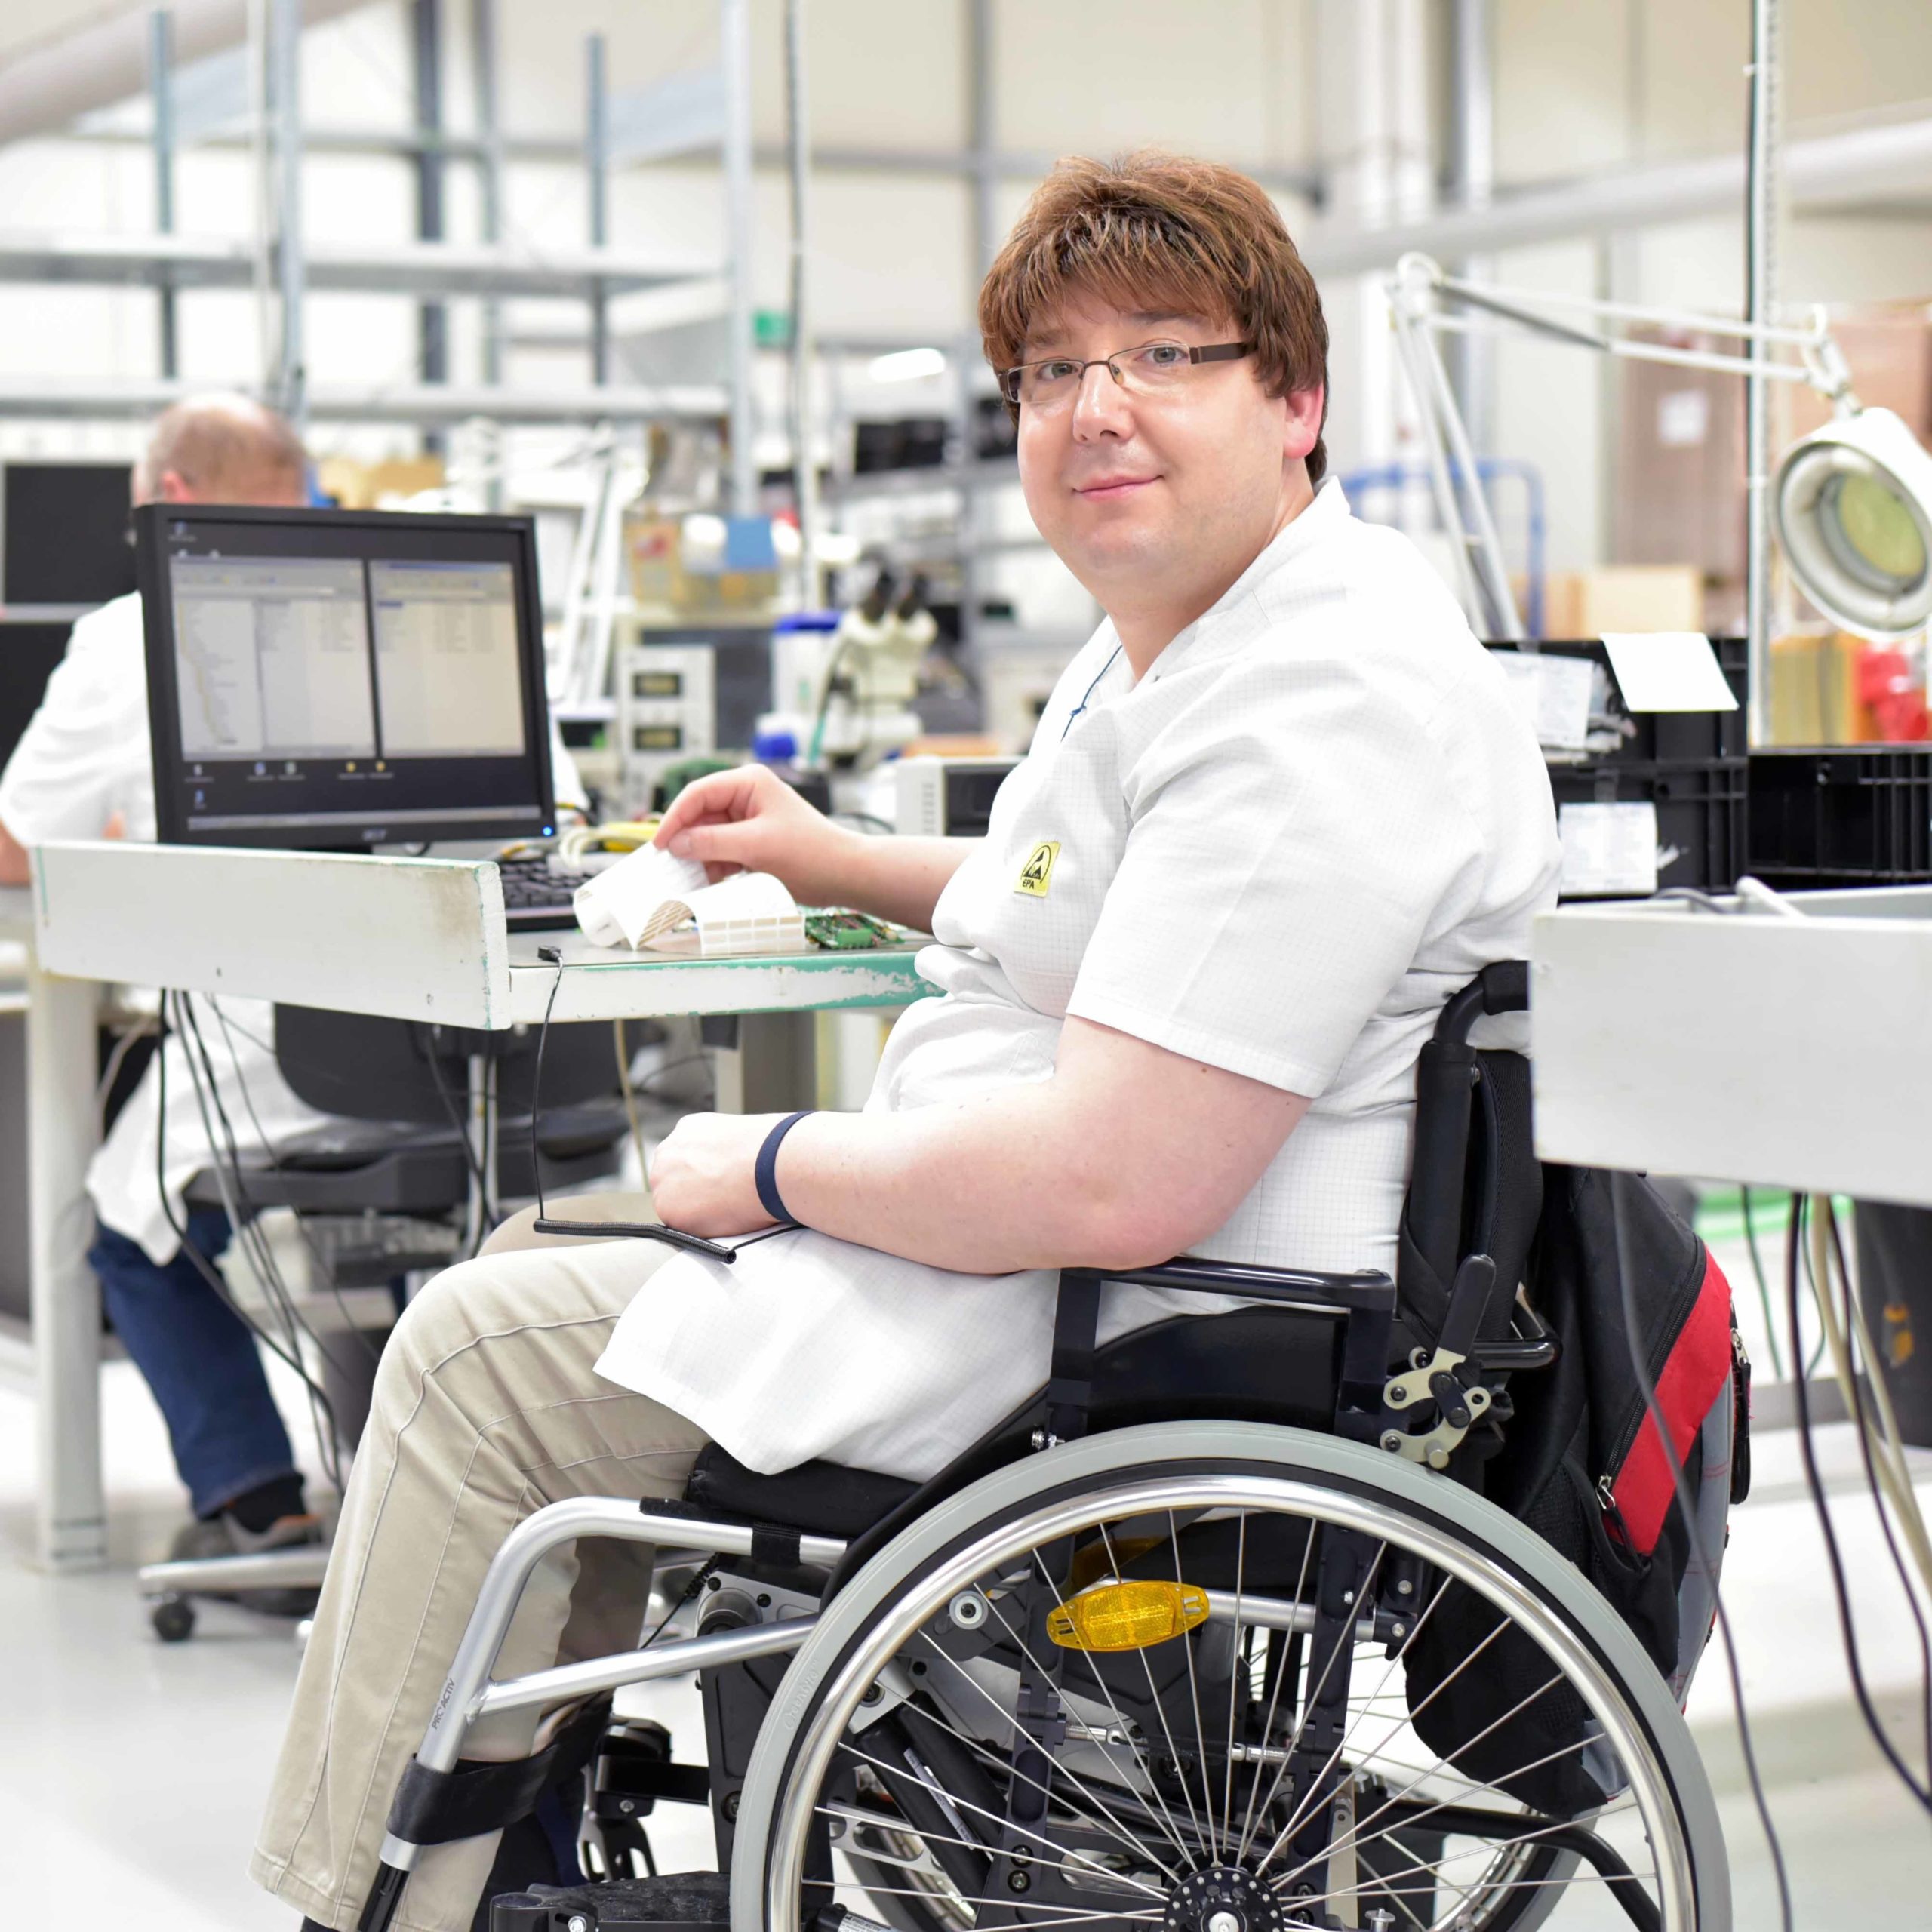 Man in wheelchair in an office setting using an Assistive Technology Computer.